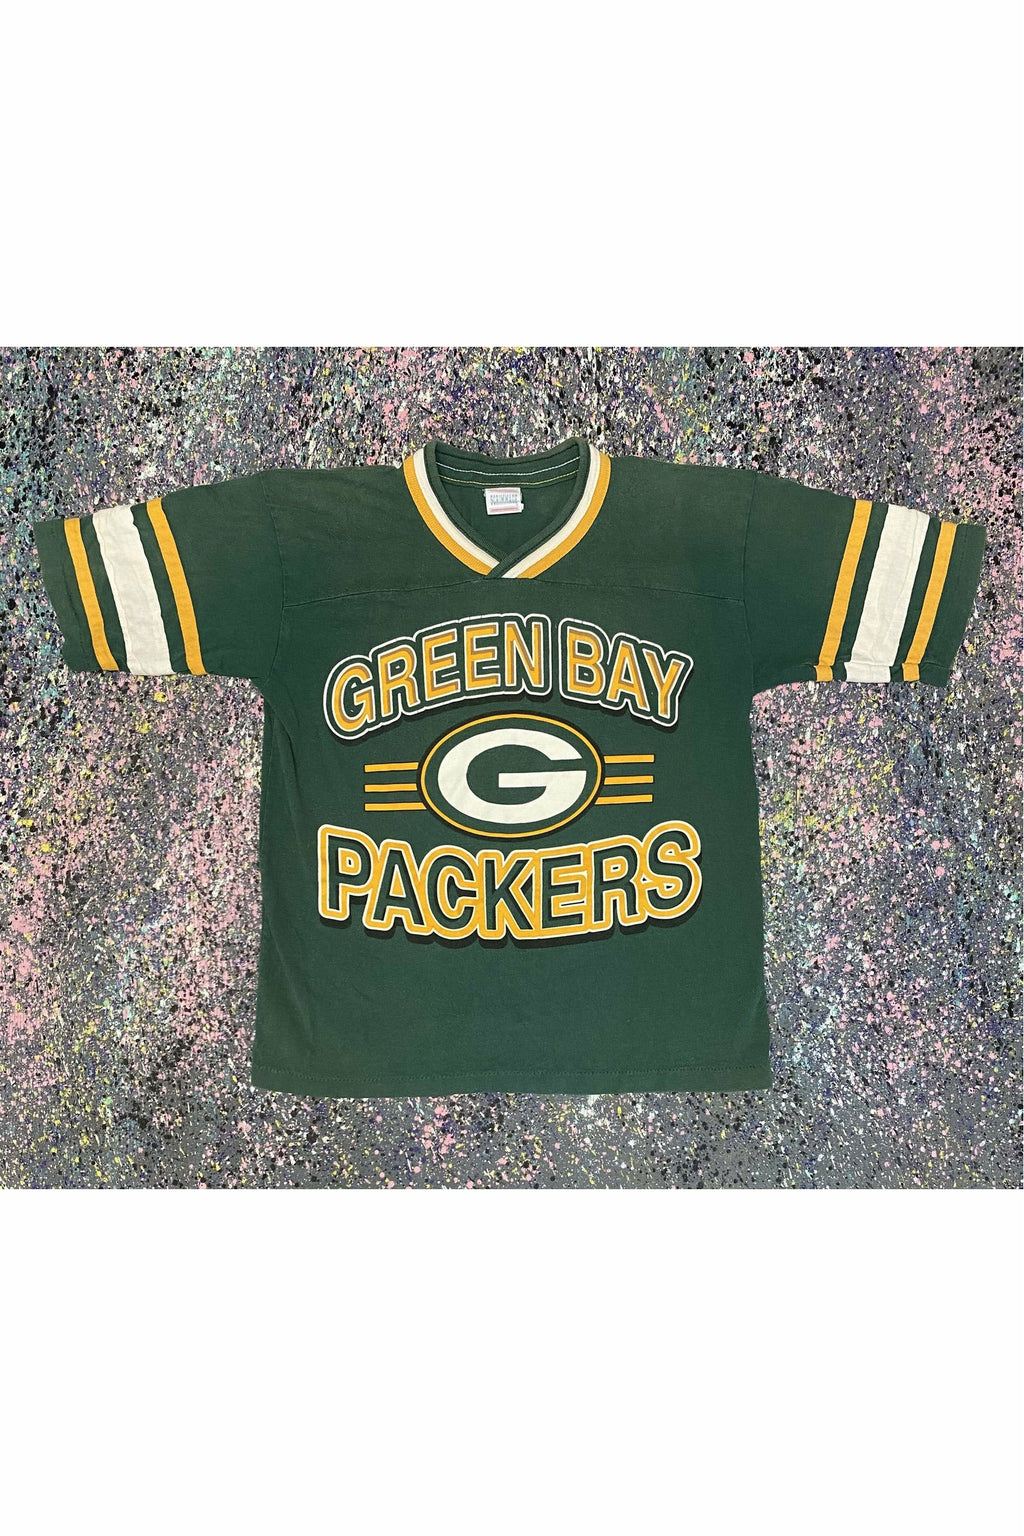 Vintage Single Stitched Youth Green Bay Packers Tee- YTH 10/12